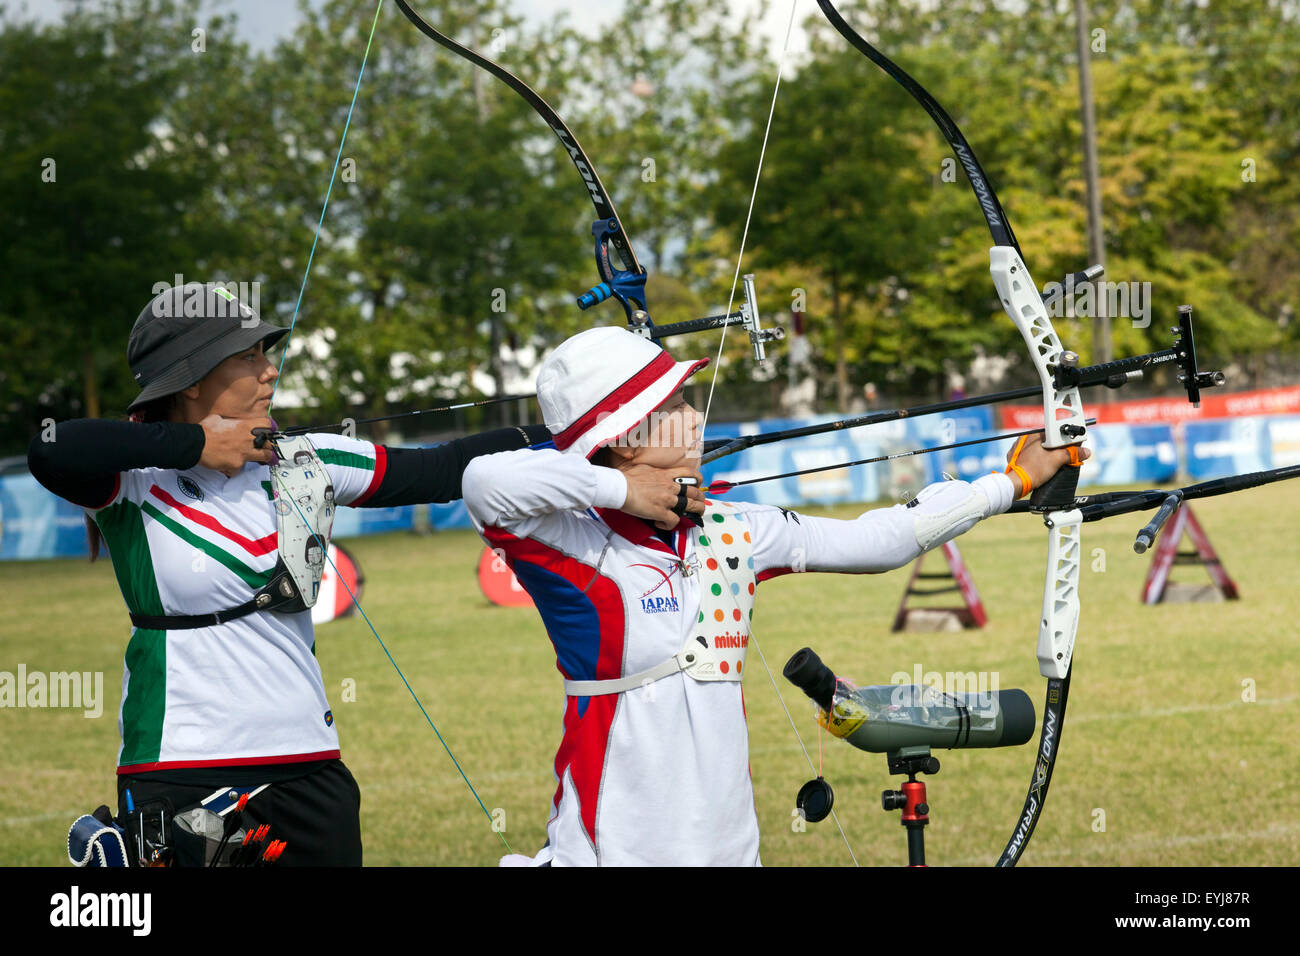 Copenhagen, Denmark, July 30th, 2015: Mexican archer Alecandra Valencia and Japanese Kaori Kawanaka competes in the World Archery Championships in Copenhagen during Thursday's individual matches  in recurve bow. Credit:  OJPHOTOS/Alamy Live News Stock Photo